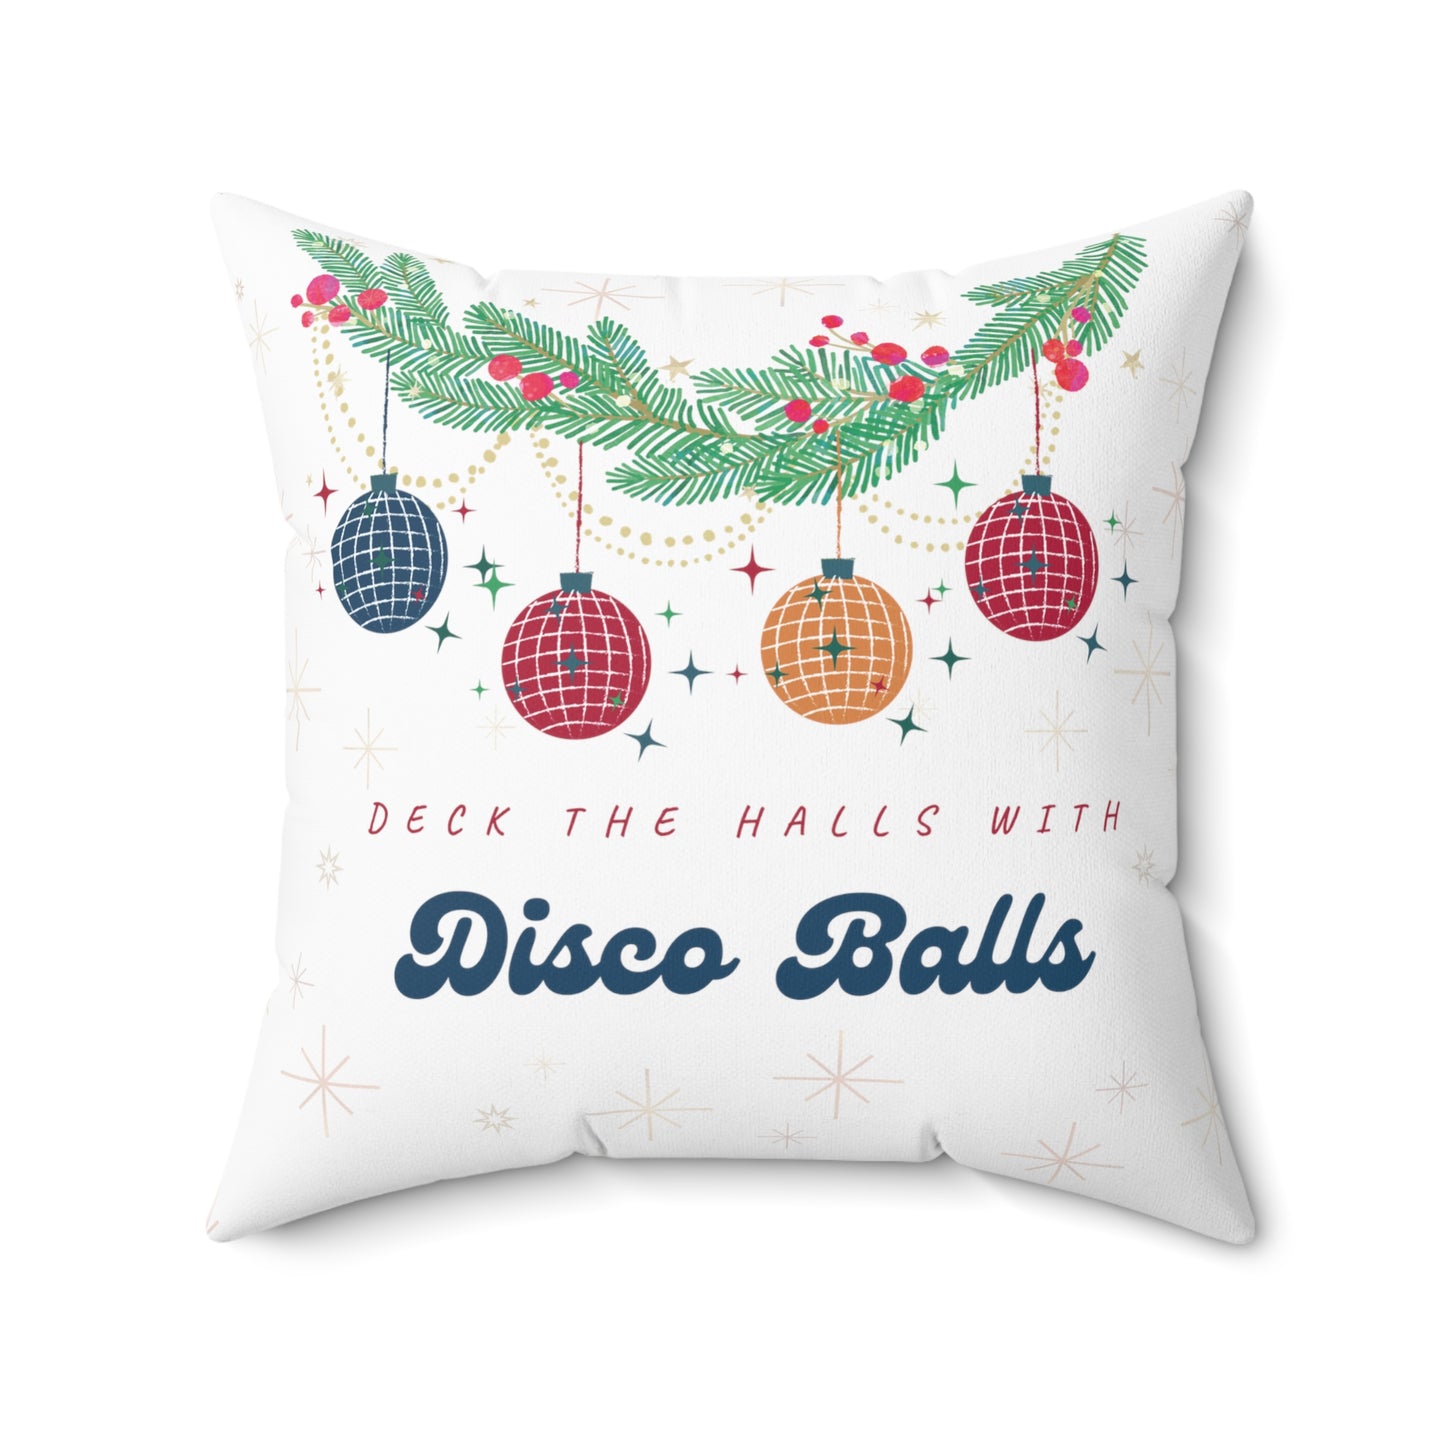 Disco Kroger 'Deck the Halls with Disco Balls' Holiday Throw Pillow